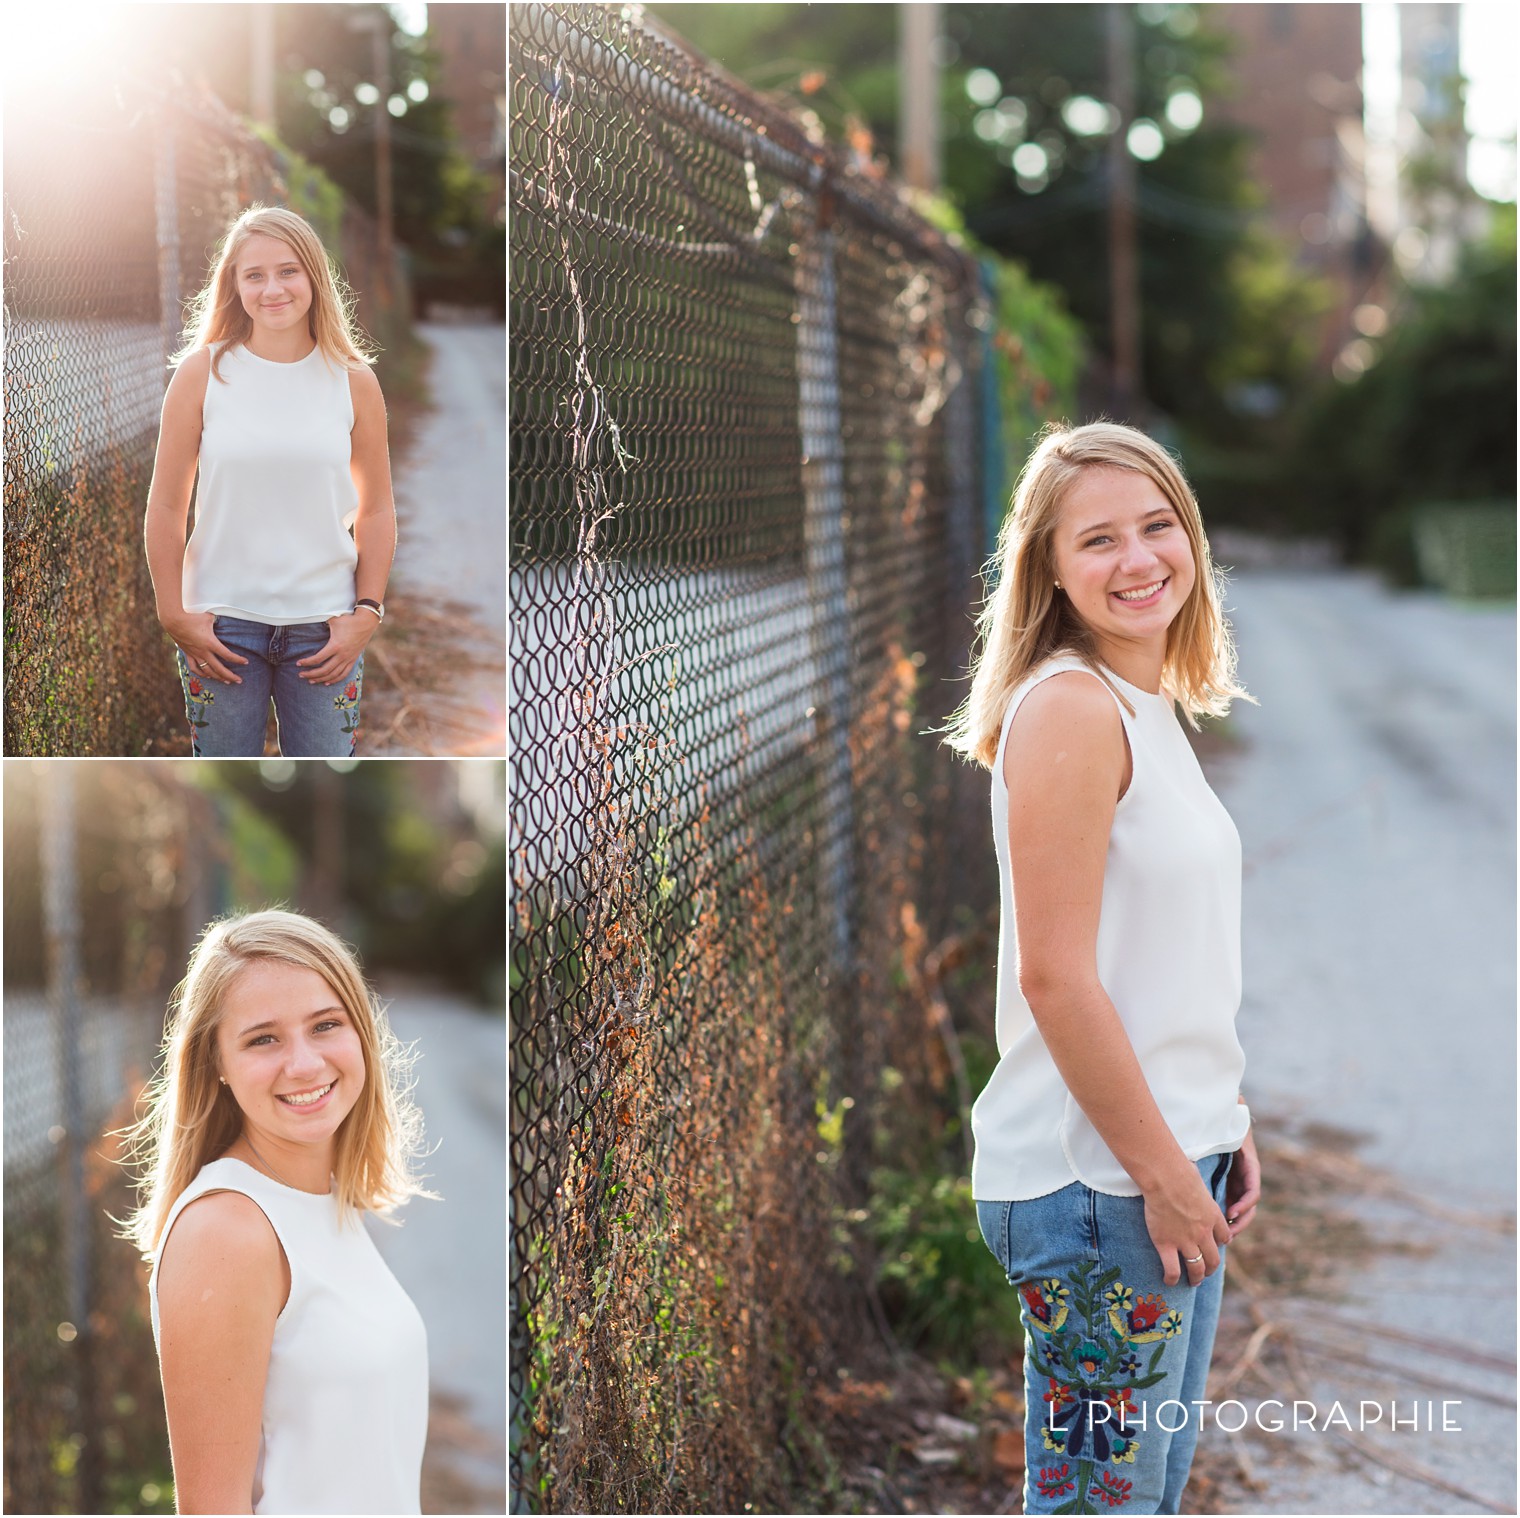 CWE,Campbell,Class of 2018,High School Senior Portraits,L Photographie high school senior pictures,L Photographie high school senior portraits,L Photographie senior pictures,L Photographie senior portraits,L Photographie seniors,L Seniors 2018,Ladue,MICDS,MICDS senior,Mary Institute and St. Louis Country Day School,Meredith Marquardt,Meredith Weinhold,Senior Pictures,Senior Portraits,St. Louis,St. Louis High School Senior Portraits,St. Louis Senior Photographer,St. Louis Senior Portraits,St. Louis county,St. Louis high school senior photographer,St. Louis high school senior pictures,St. Louis senior pictures,best high school senior photographer,central west end,city senior pictures,city session,high school senior pictures,natural light portraits,outdoor portraits,private school,senior pictures in the Central West End,senior session,